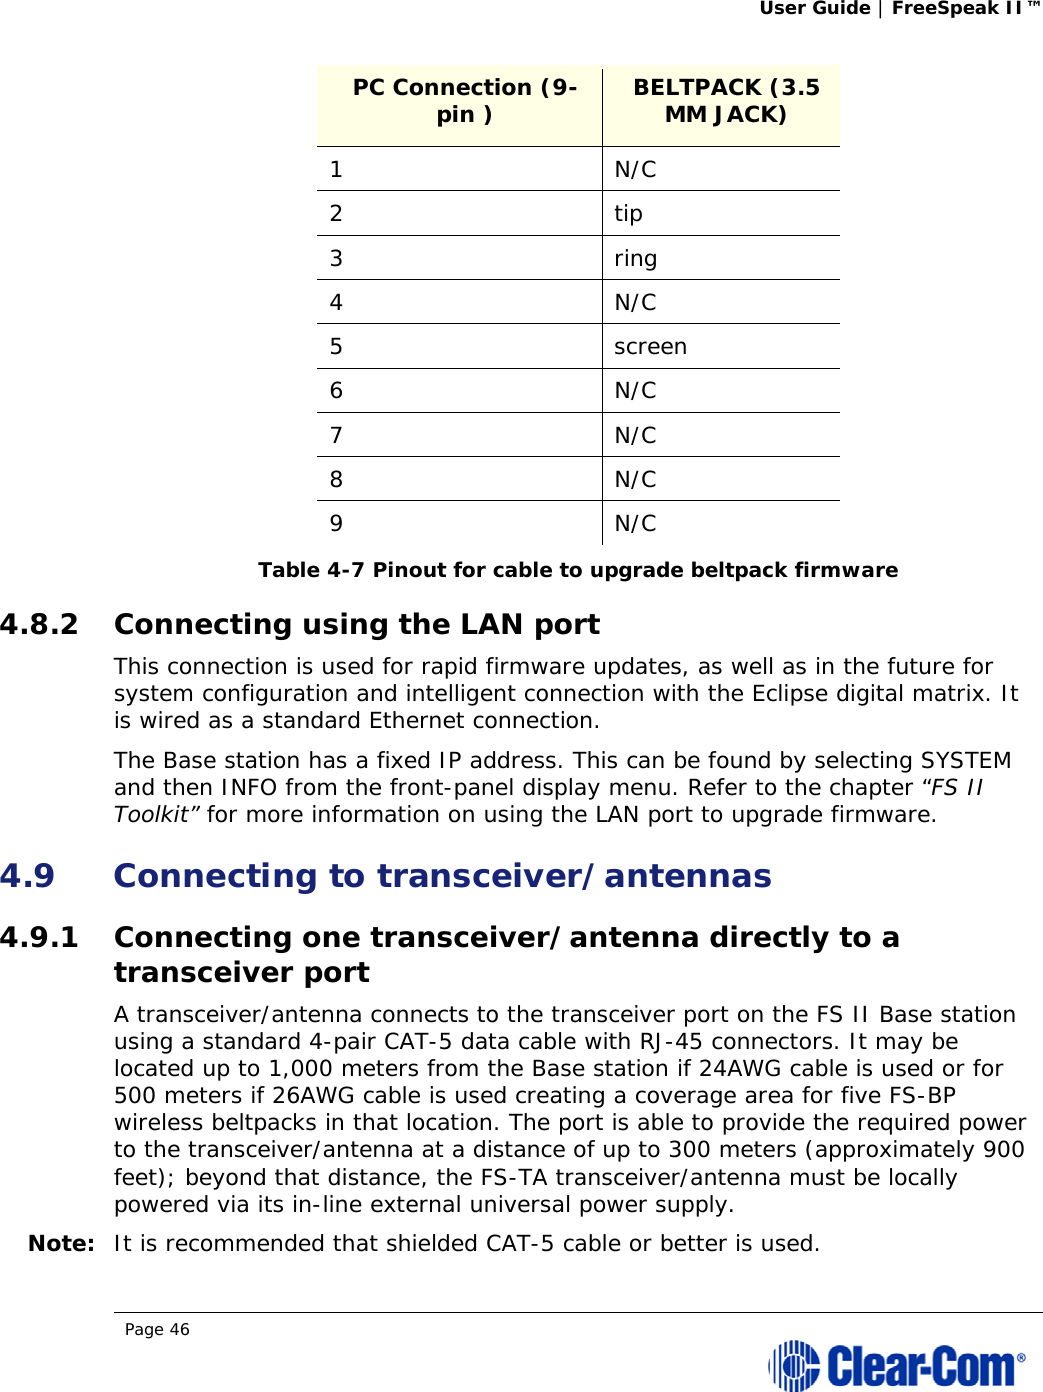 User Guide | FreeSpeak II™  Page 46  PC Connection (9-pin )   BELTPACK (3.5 MM JACK) 1 N/C 2 tip 3 ring 4 N/C 5 screen 6 N/C 7 N/C 8 N/C 9 N/C Table 4-7 Pinout for cable to upgrade beltpack firmware 4.8.2 Connecting using the LAN port This connection is used for rapid firmware updates, as well as in the future for system configuration and intelligent connection with the Eclipse digital matrix. It is wired as a standard Ethernet connection.  The Base station has a fixed IP address. This can be found by selecting SYSTEM and then INFO from the front-panel display menu. Refer to the chapter “FS II Toolkit” for more information on using the LAN port to upgrade firmware.  4.9 Connecting to transceiver/antennas 4.9.1 Connecting one transceiver/antenna directly to a transceiver port A transceiver/antenna connects to the transceiver port on the FS II Base station using a standard 4-pair CAT-5 data cable with RJ-45 connectors. It may be located up to 1,000 meters from the Base station if 24AWG cable is used or for 500 meters if 26AWG cable is used creating a coverage area for five FS-BP wireless beltpacks in that location. The port is able to provide the required power to the transceiver/antenna at a distance of up to 300 meters (approximately 900 feet); beyond that distance, the FS-TA transceiver/antenna must be locally powered via its in-line external universal power supply. Note: It is recommended that shielded CAT-5 cable or better is used. 